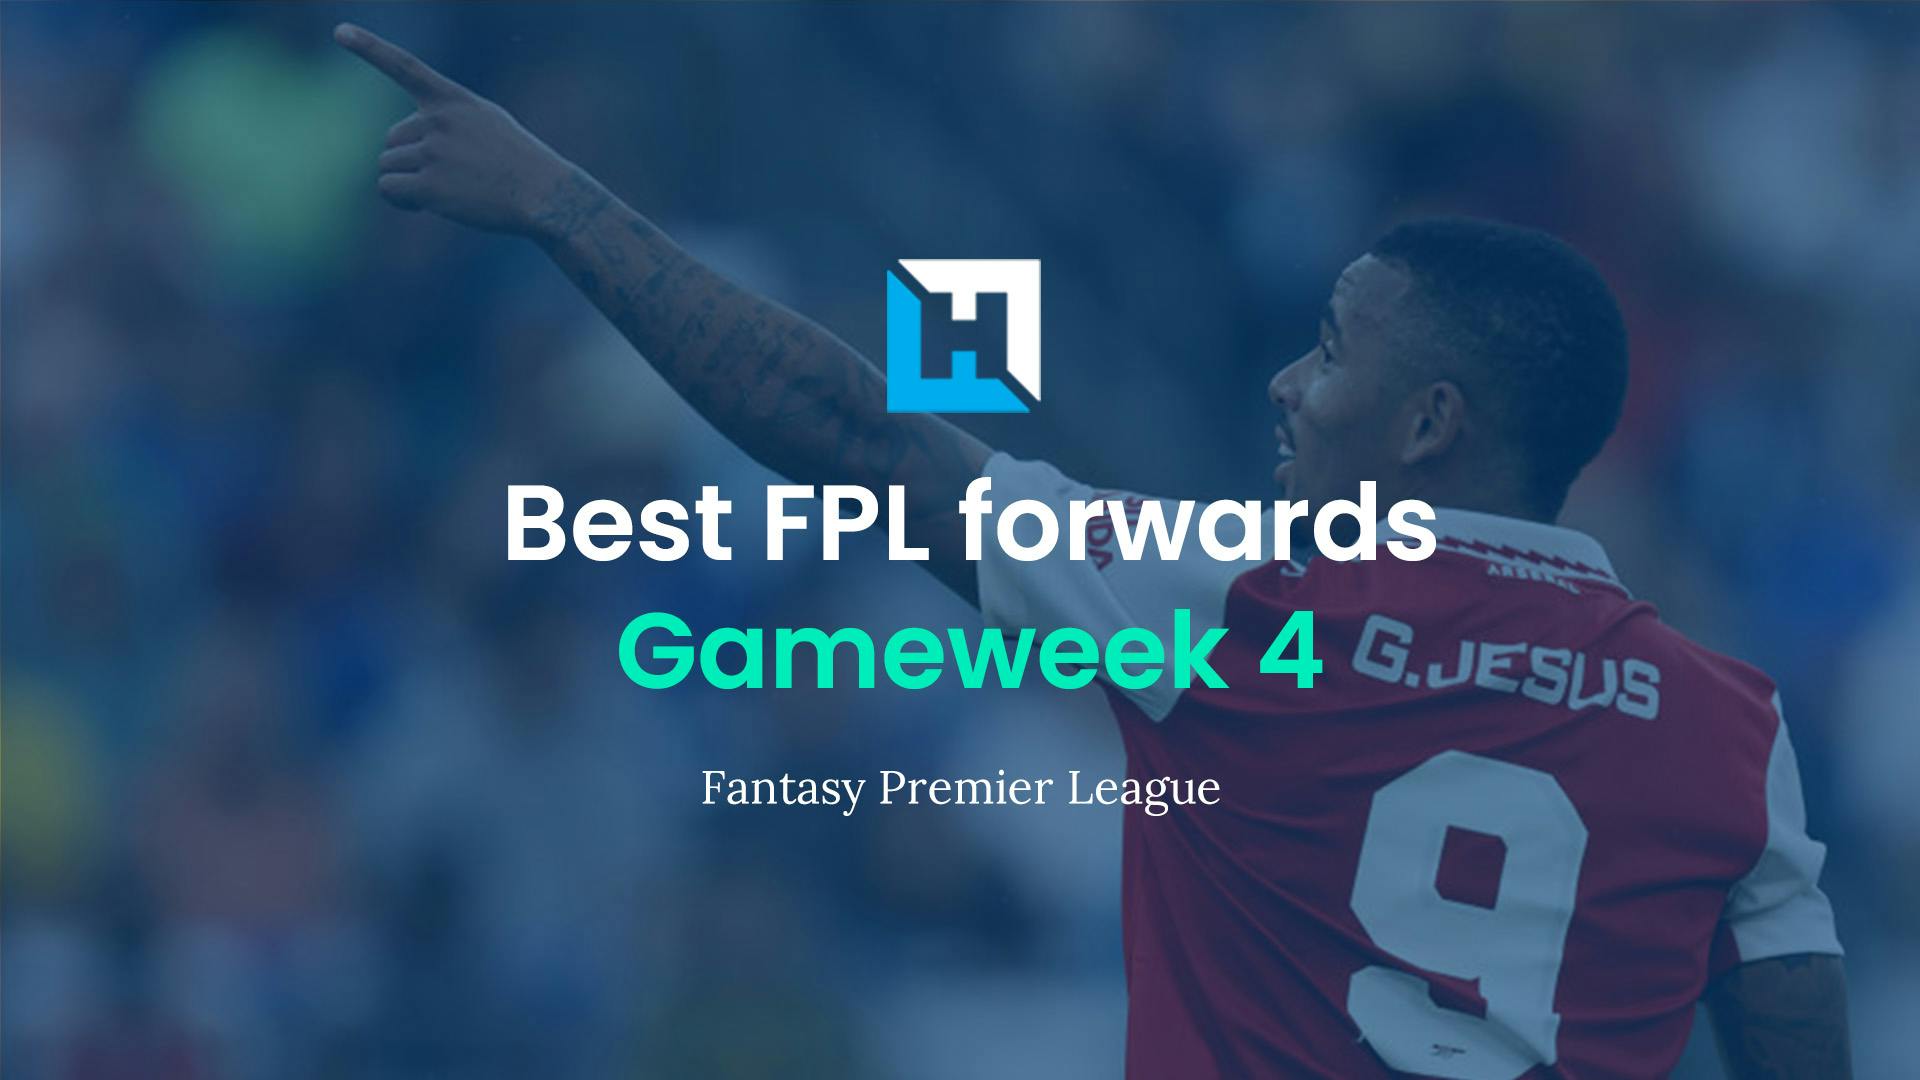 Best FPL players for Gameweek 4: Top 5 best forwards